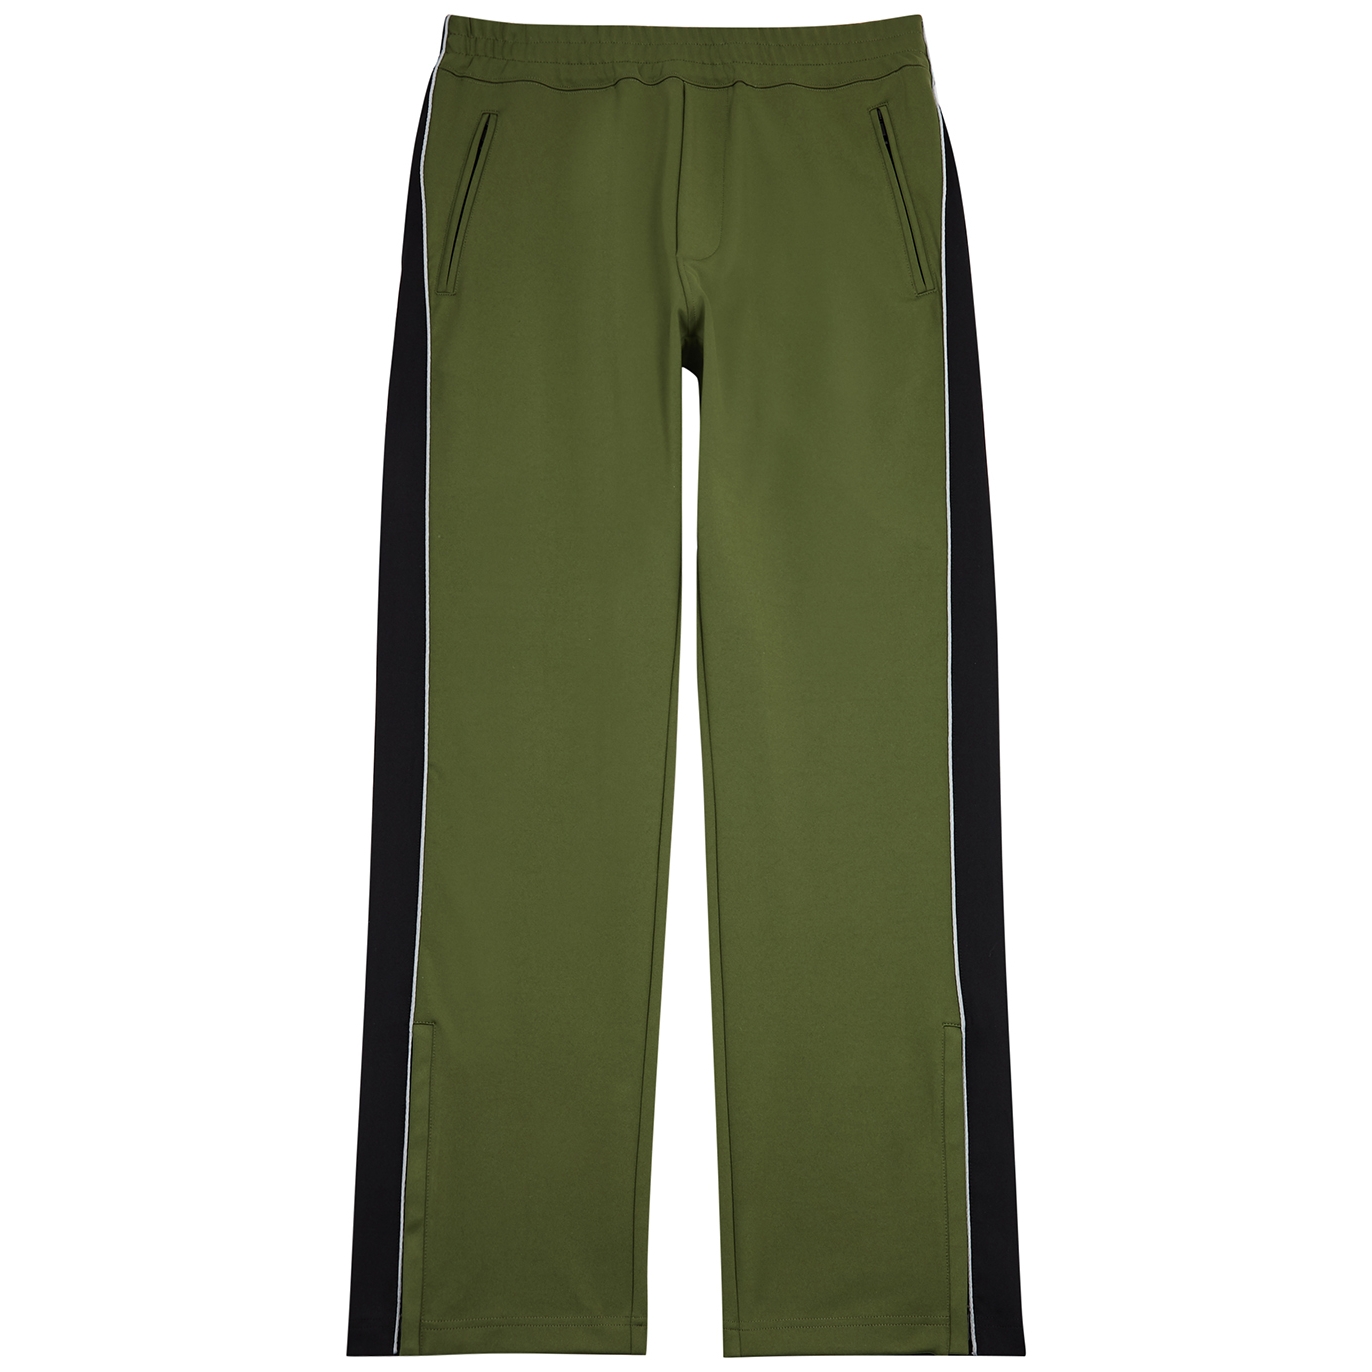 MONCLER GENIUS 1 MONCLER JW ANDERSON STRETCH-JERSEY SWEATtrousers